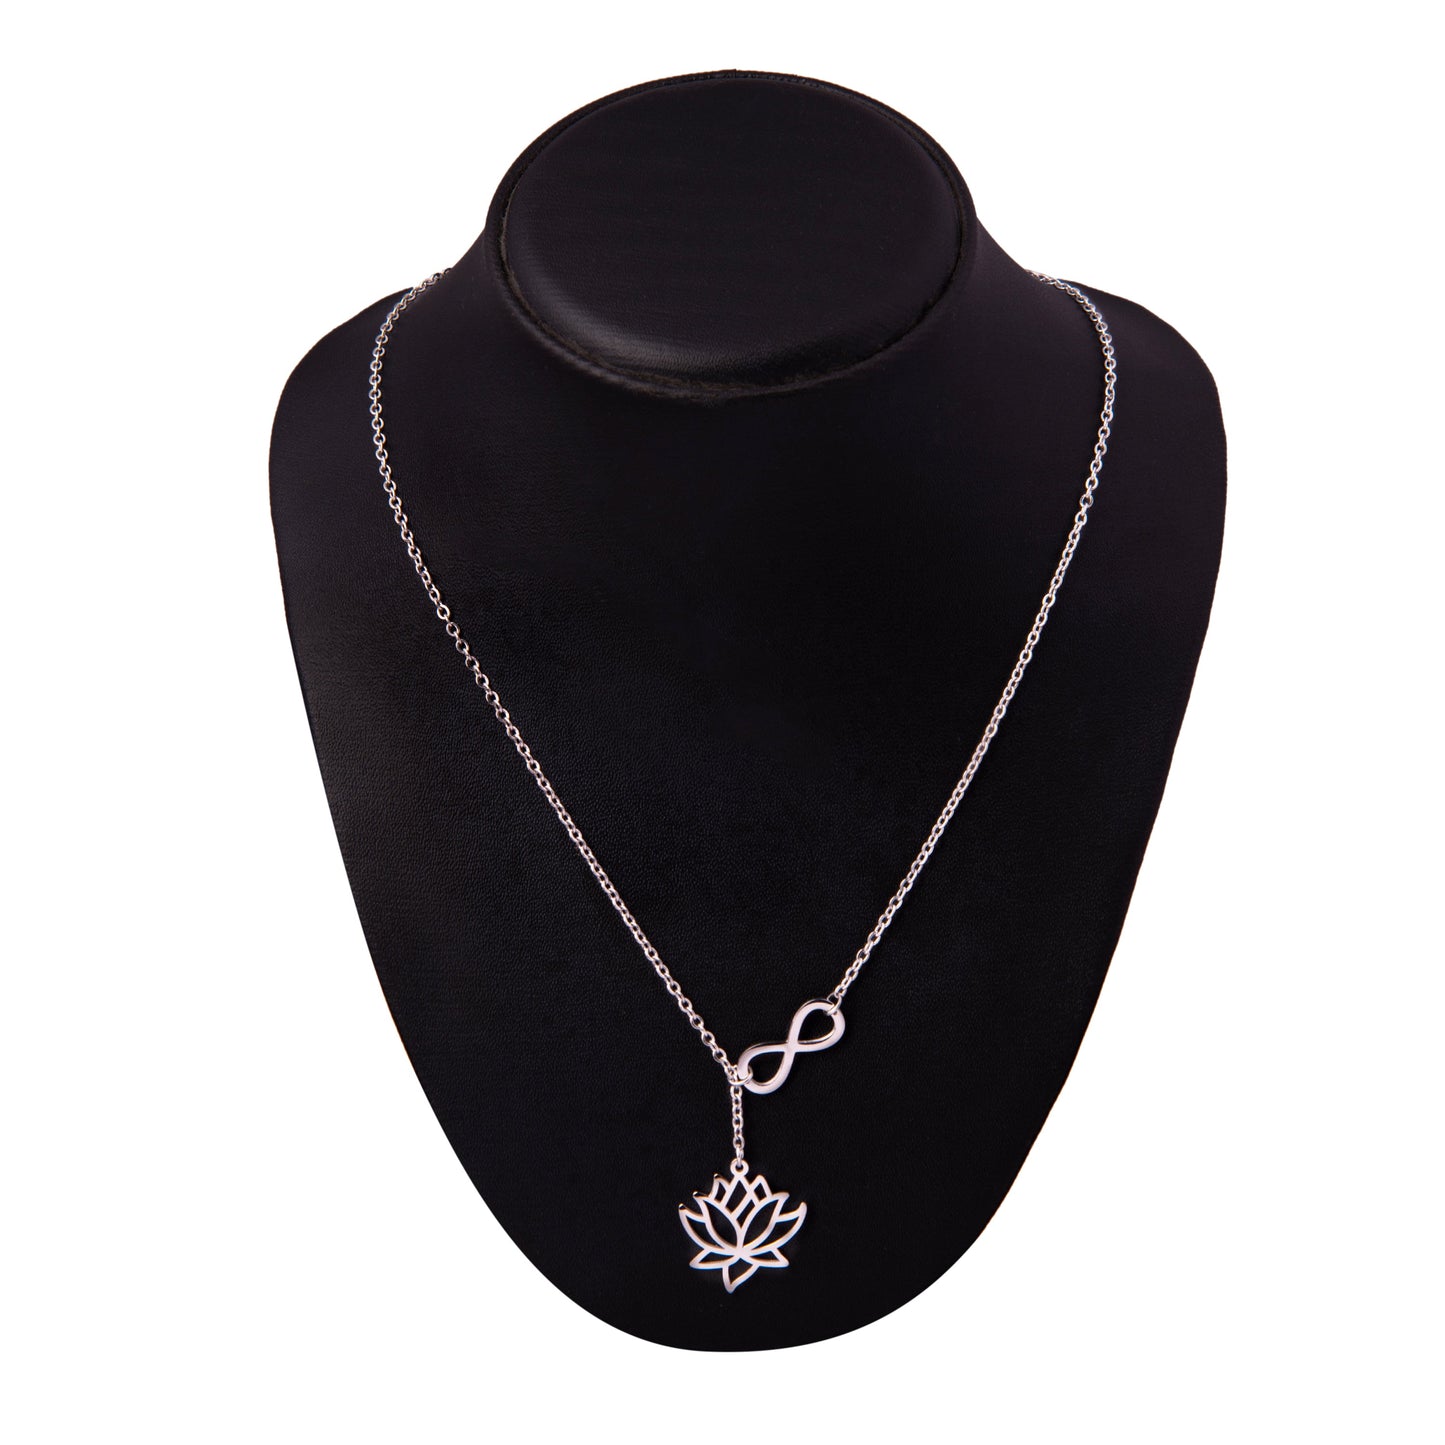 Silver Plated Stylish Designer Adjustable and Delicate Lotus & Infinity Necklace Pendant For Girls, Teens & Women (MD_2116)